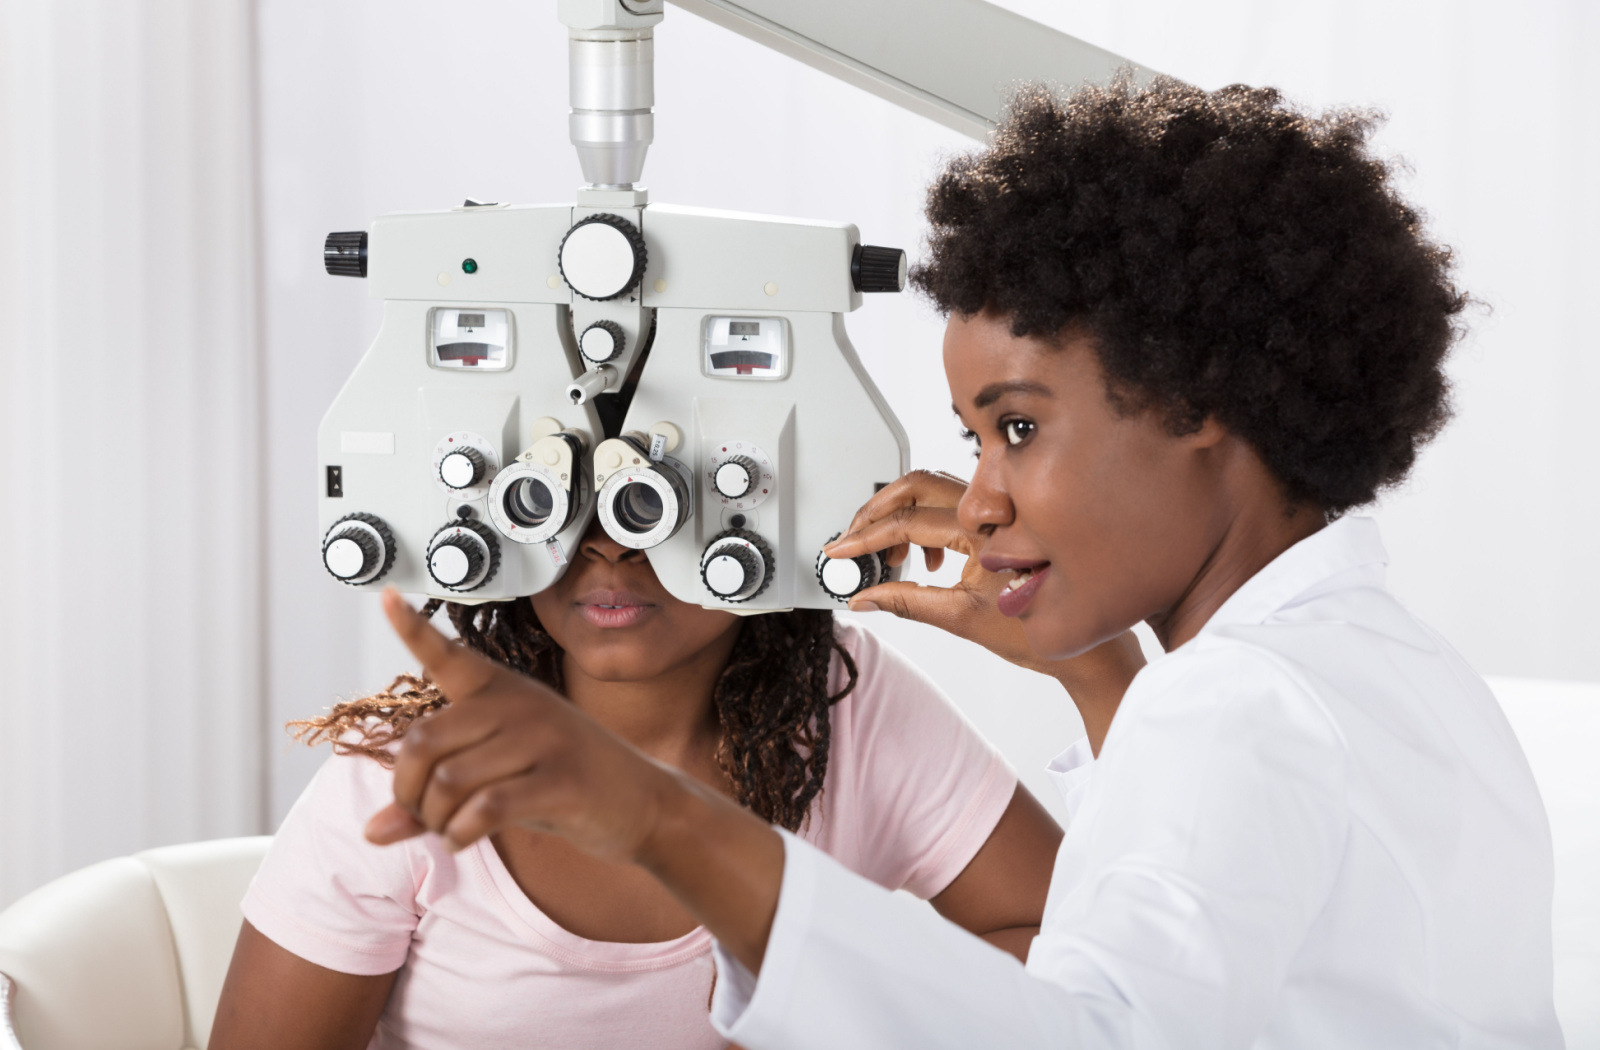 An optometrist conducting an eye exam on her patient using a phoropter.